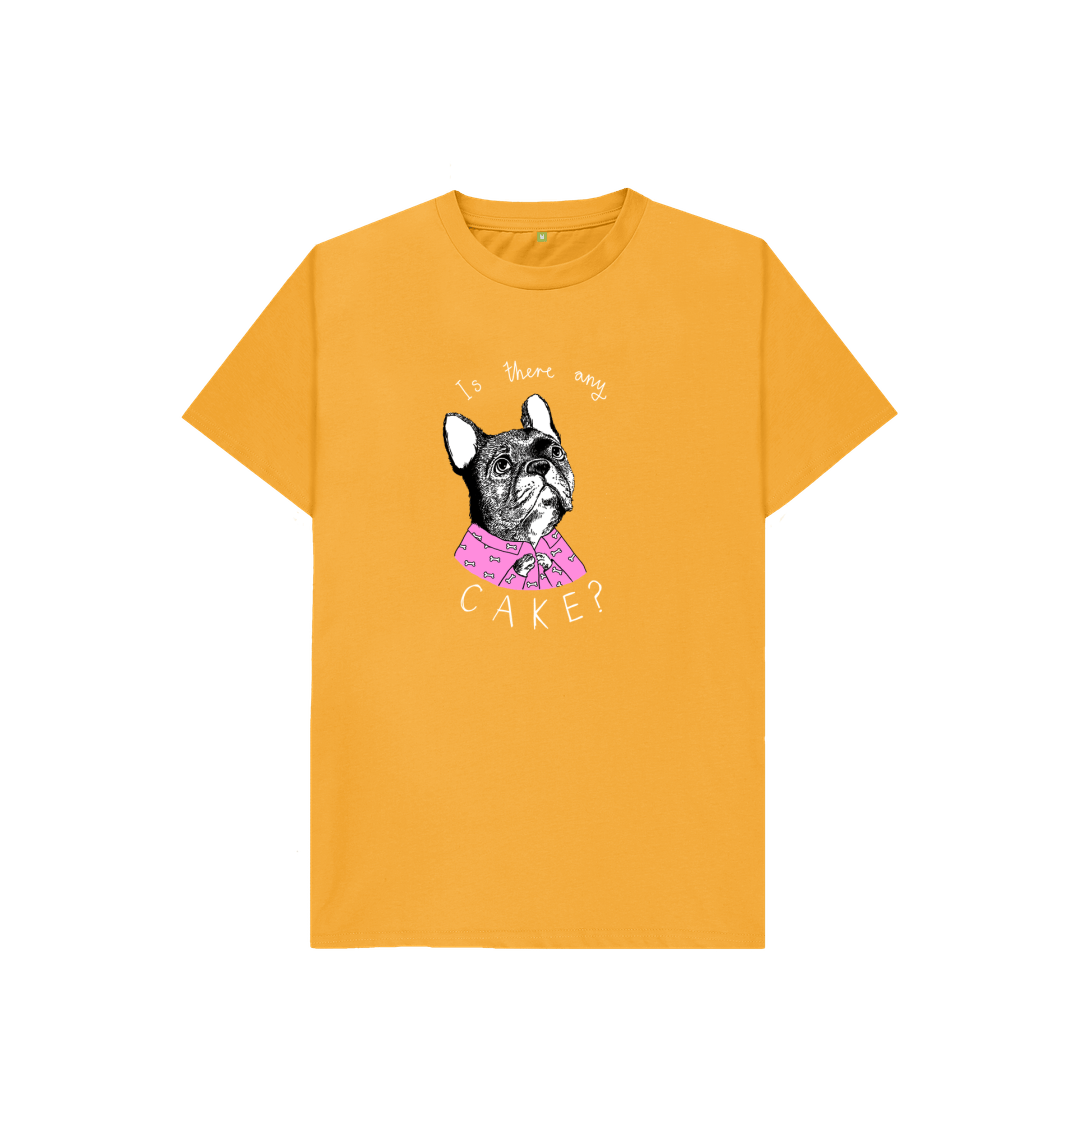 Mustard 'Is There Any Cake?' Kids T-shirt